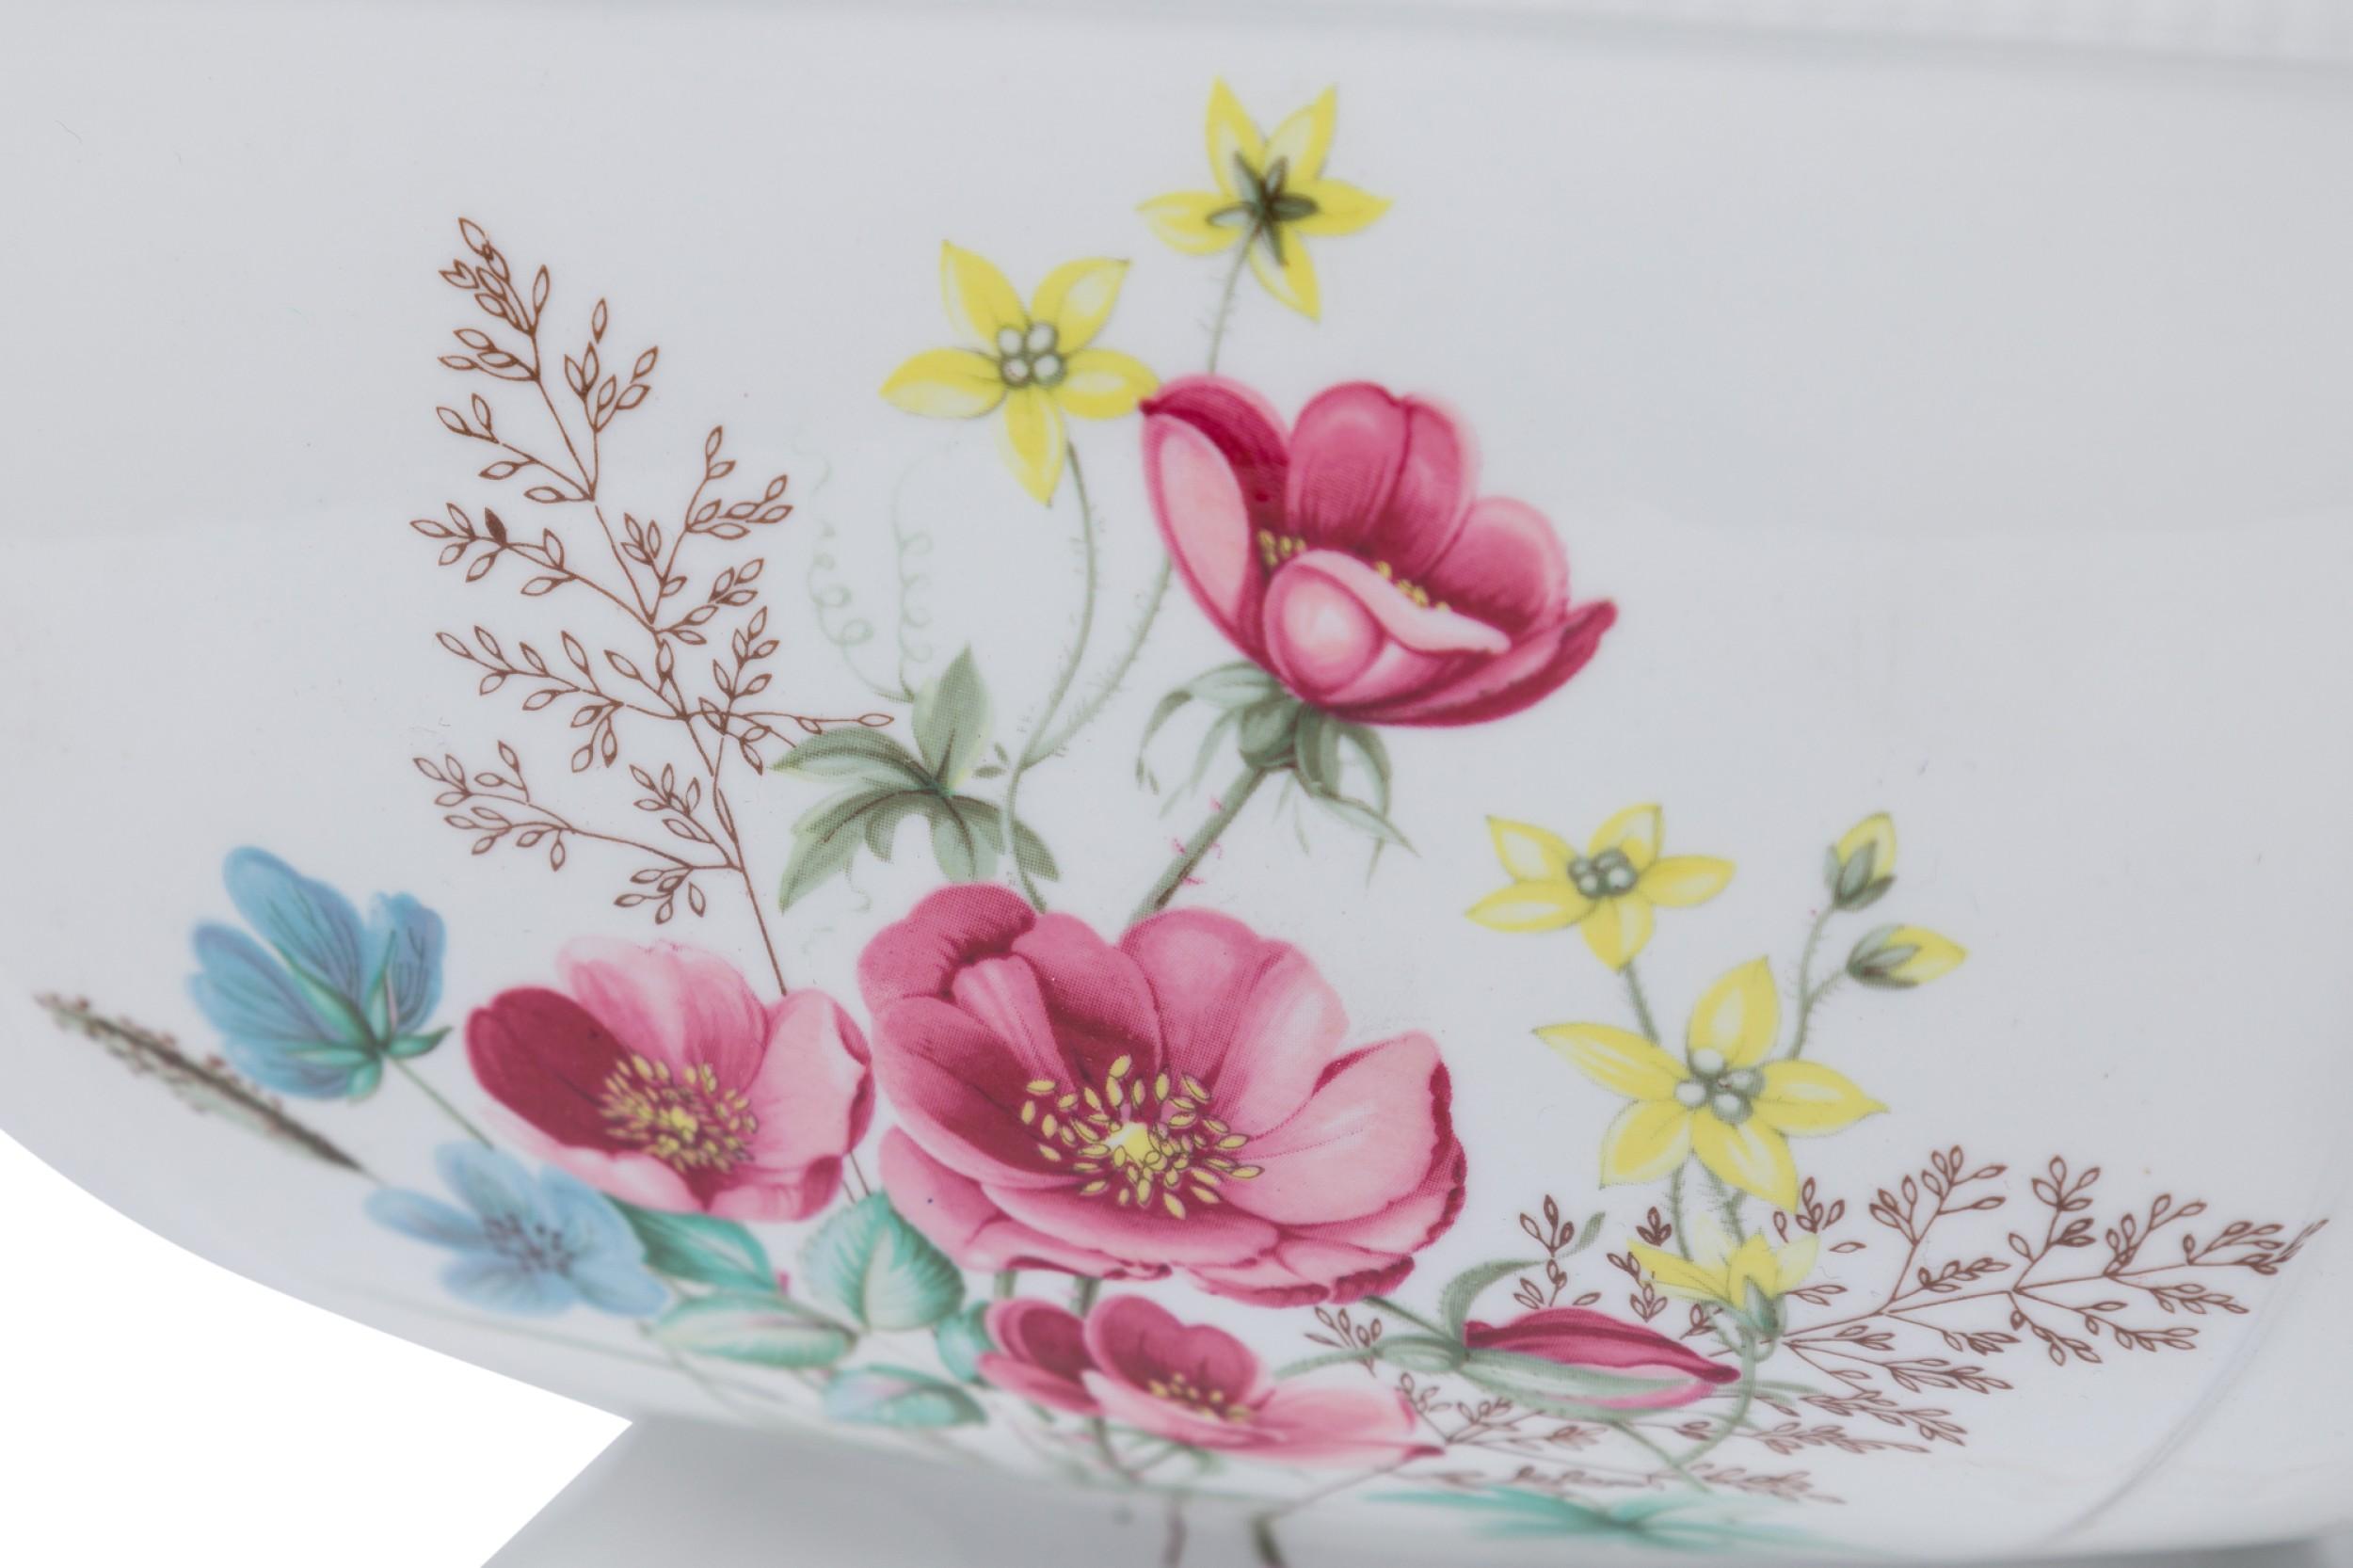 Mid-Century English bone china square form, footed bowl with scalloped corners and textured gilt rims, features a painted multicolor floral spray centered on each side, both interior and exterior. (AYNSLEY)